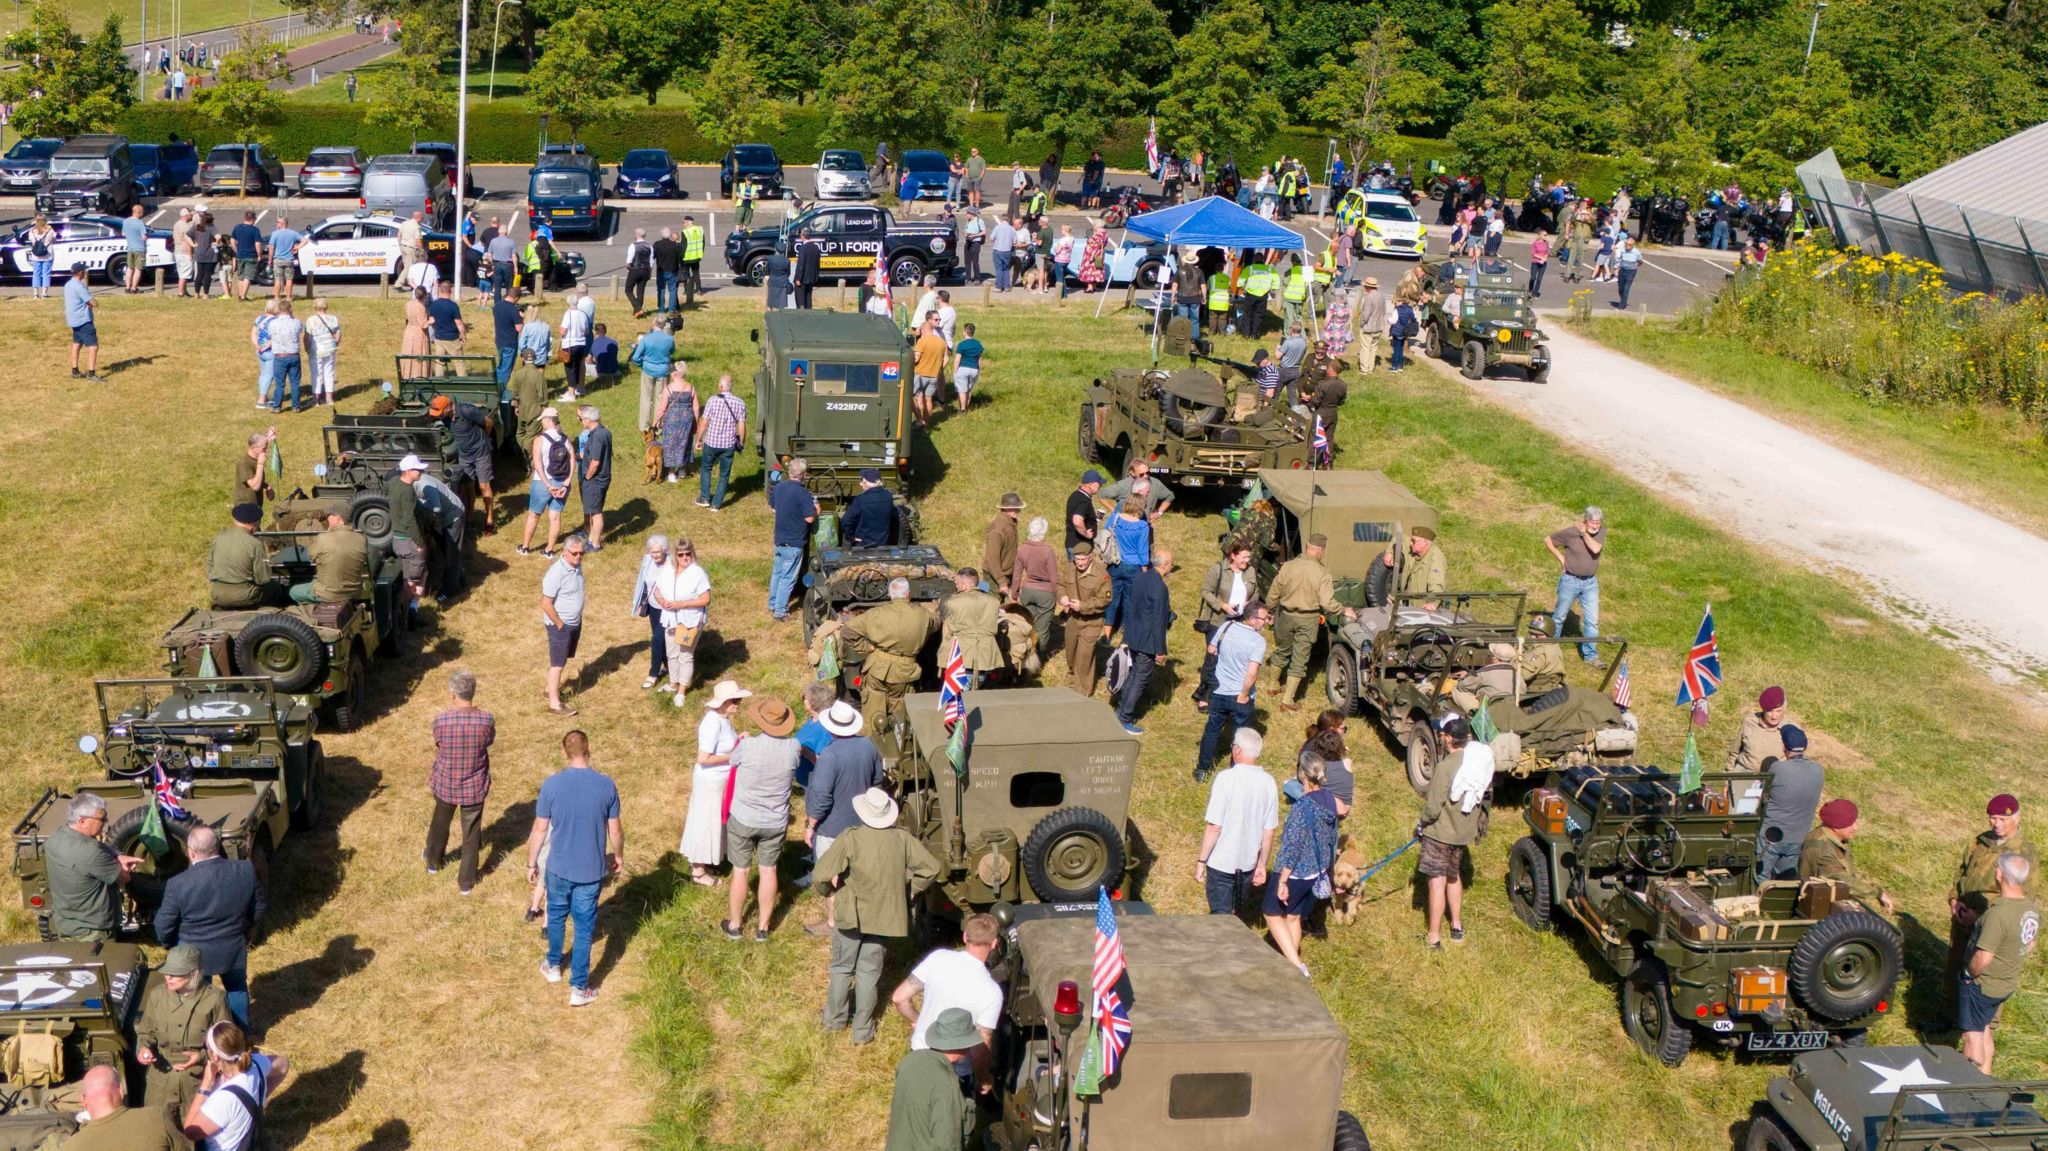 Military vehicles lined up and ready to depart the green in Basingstoke